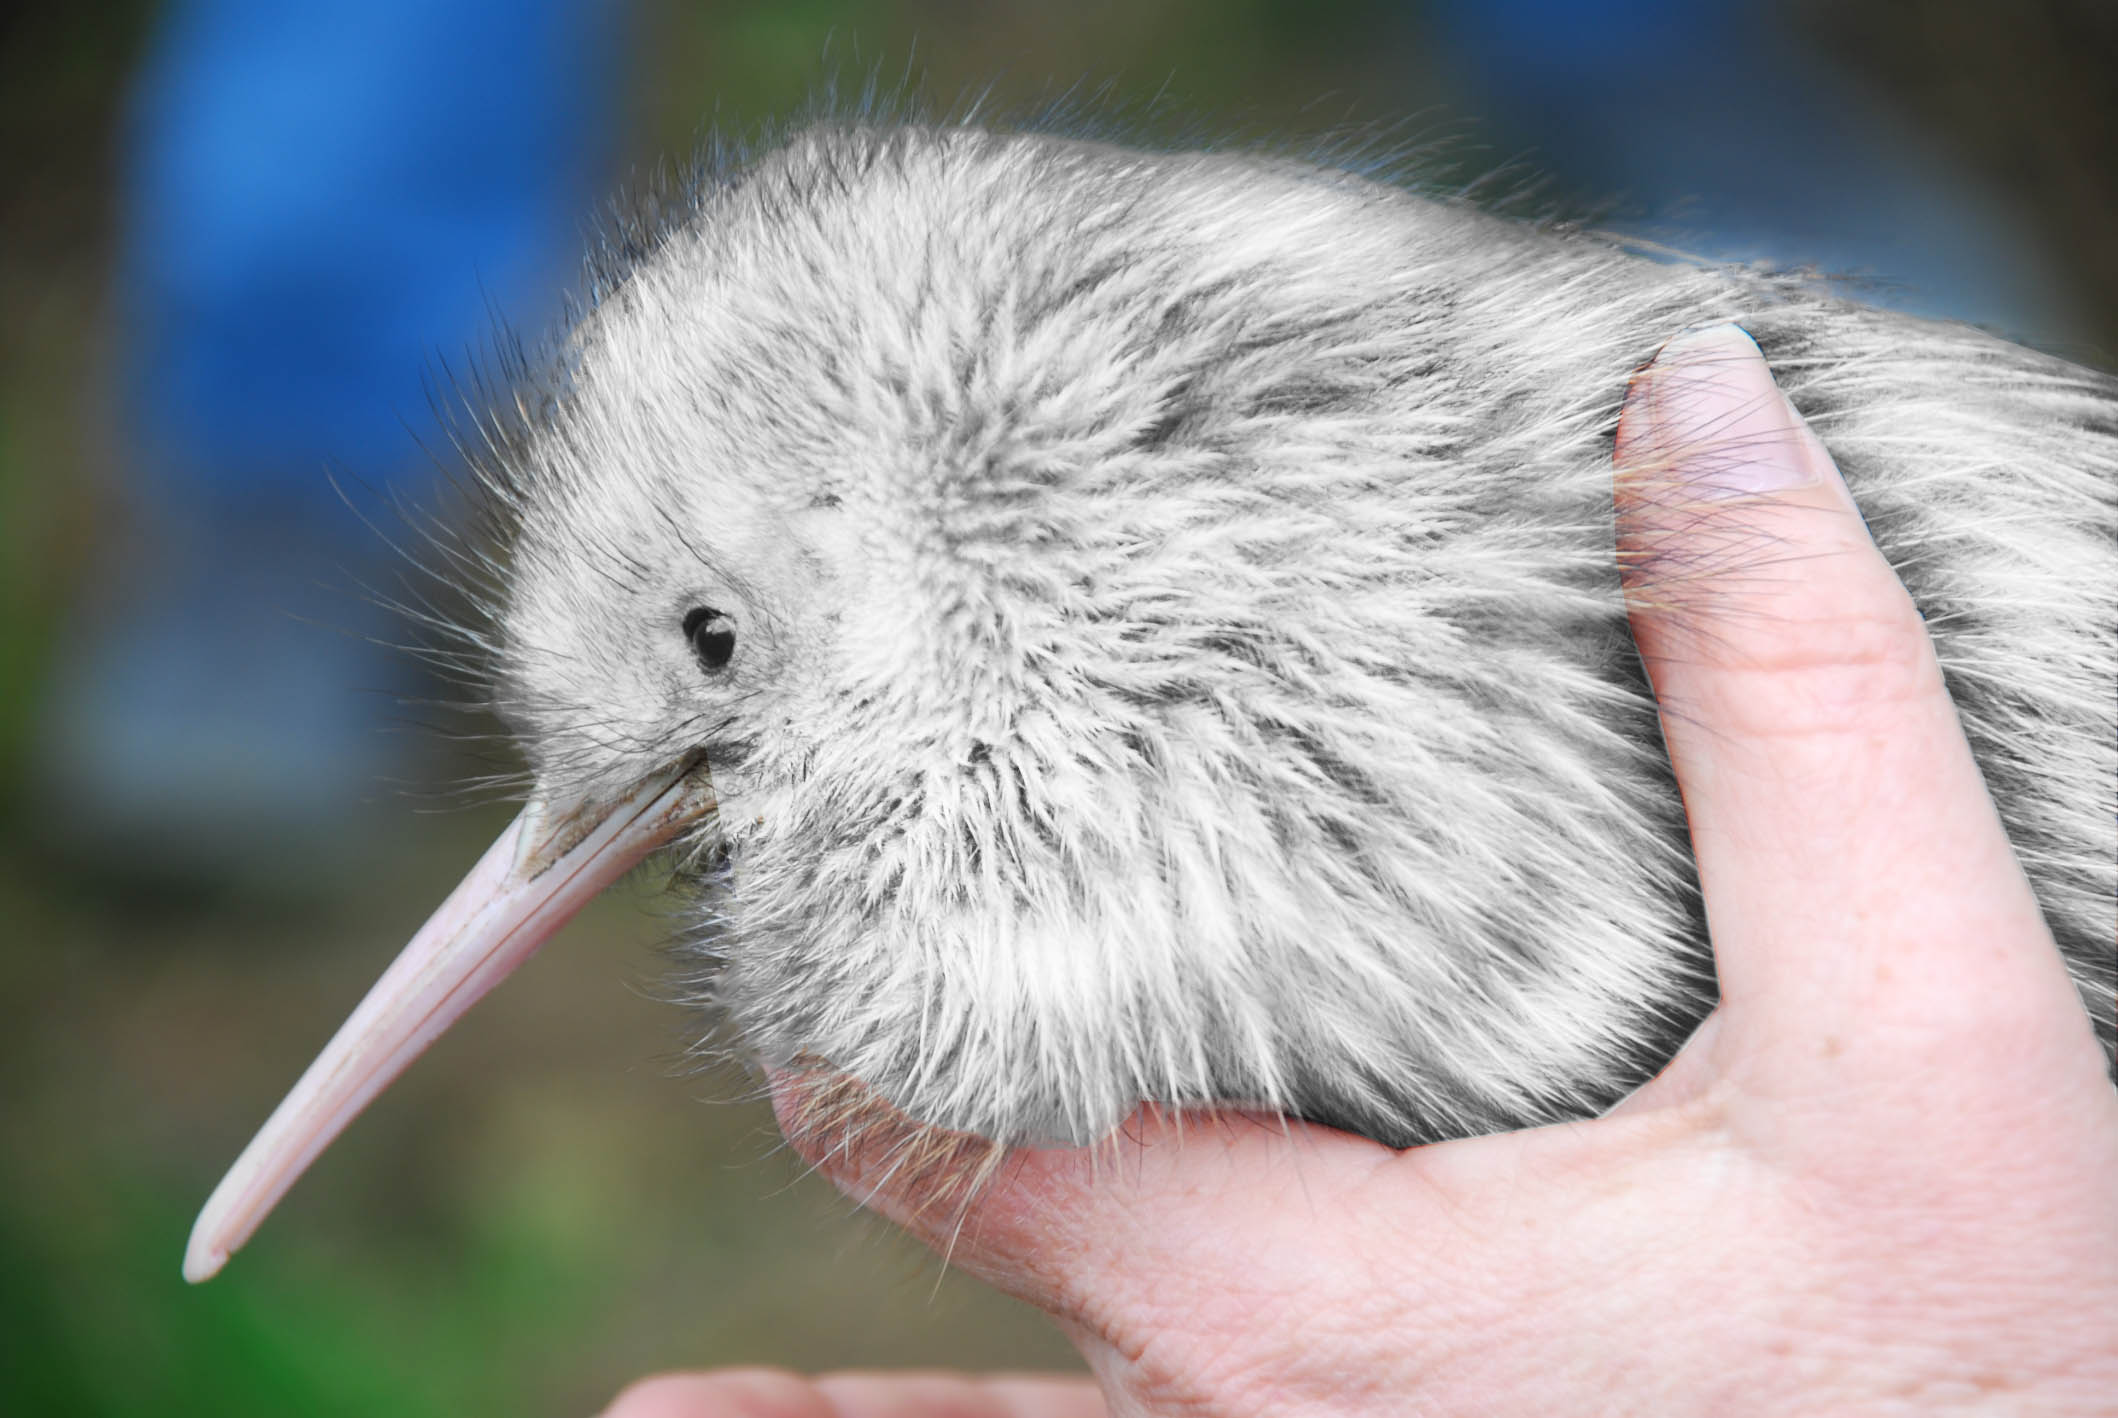 Kiwi locums are atwitter over their fair-feathered friend - Global